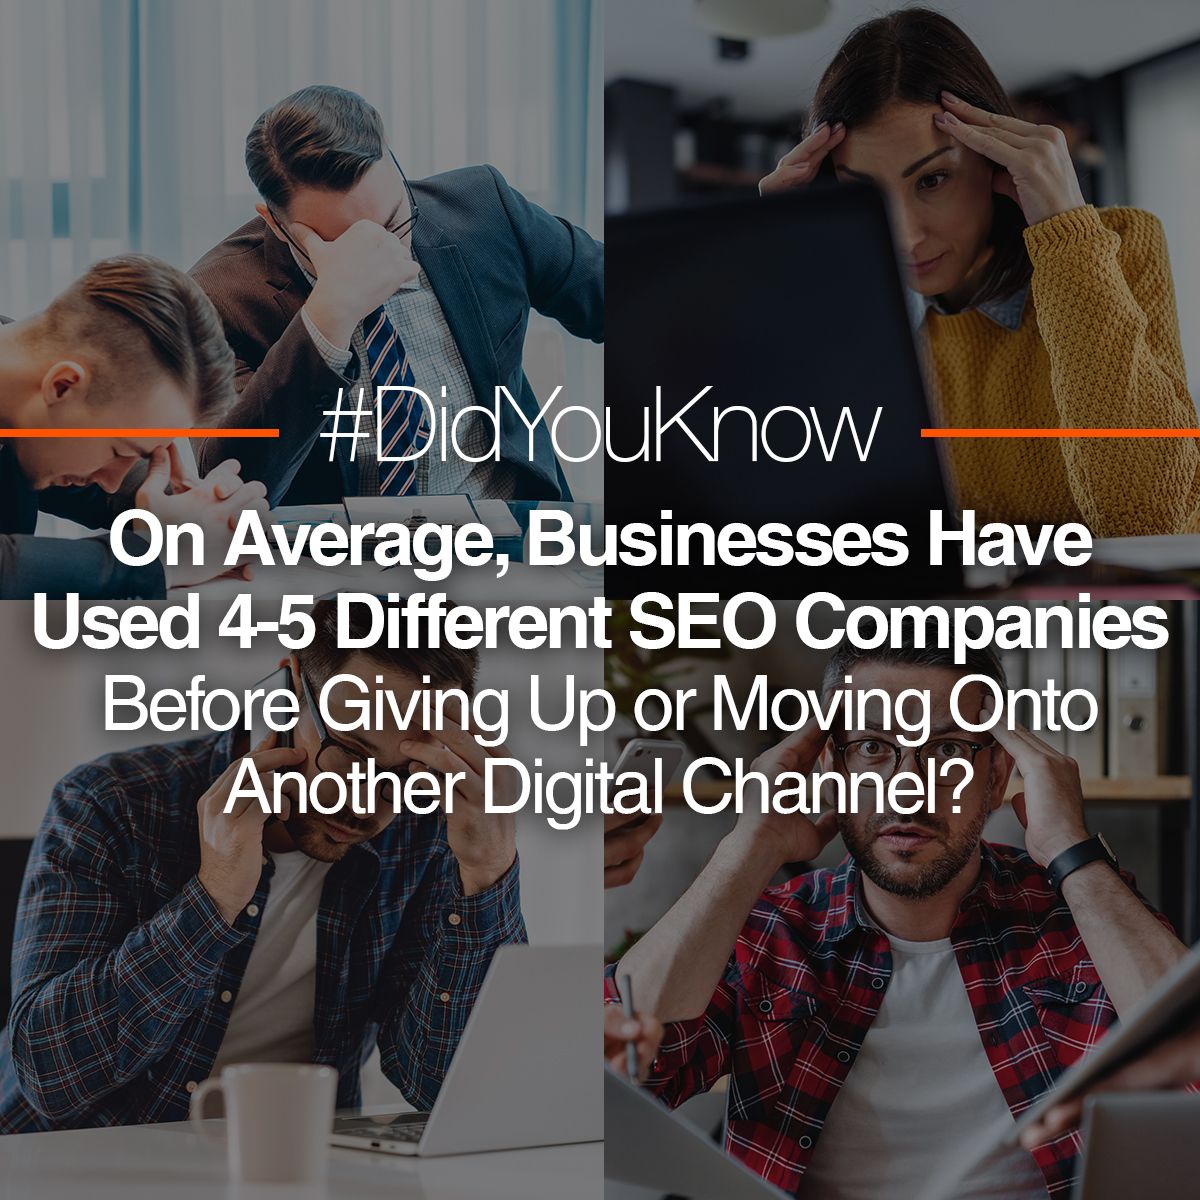 #DidYouKnow On Average Businesses Have Used 4-5 Different SEO Companies Before Giving Up or Moving Onto Another Digital Channel?